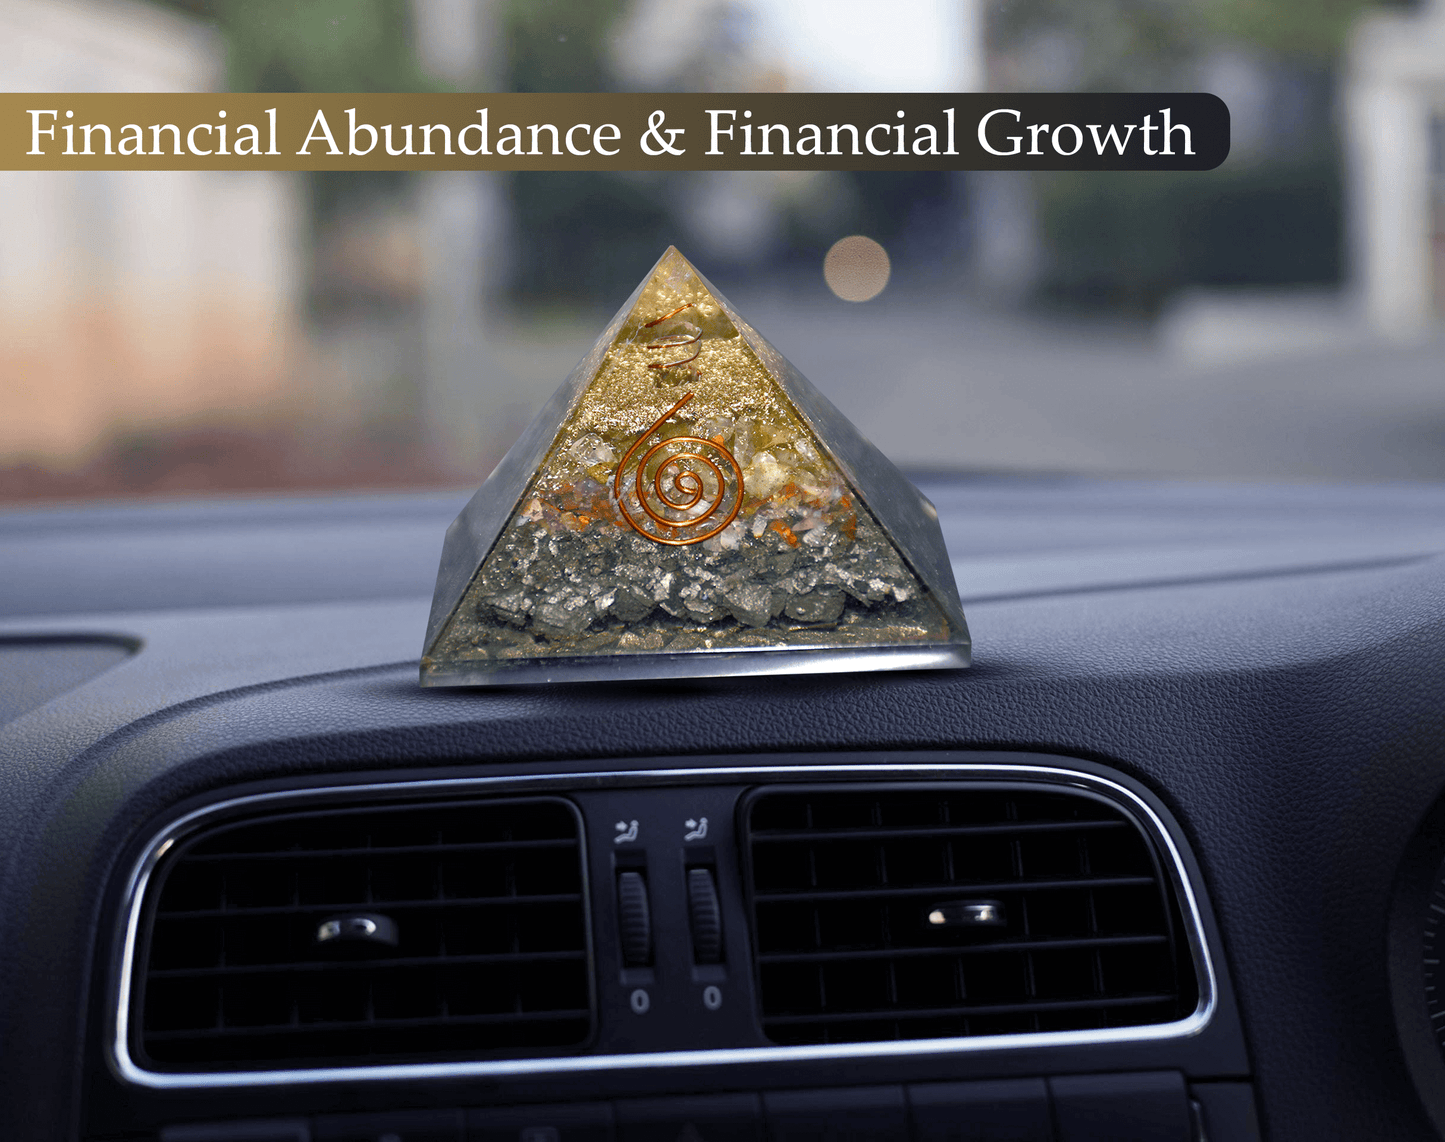 Pre- Energized Natural Crystal Pyramid for Financial Abundance & Financial Growth for Car Dashboard, Home, Office & Gifting Option